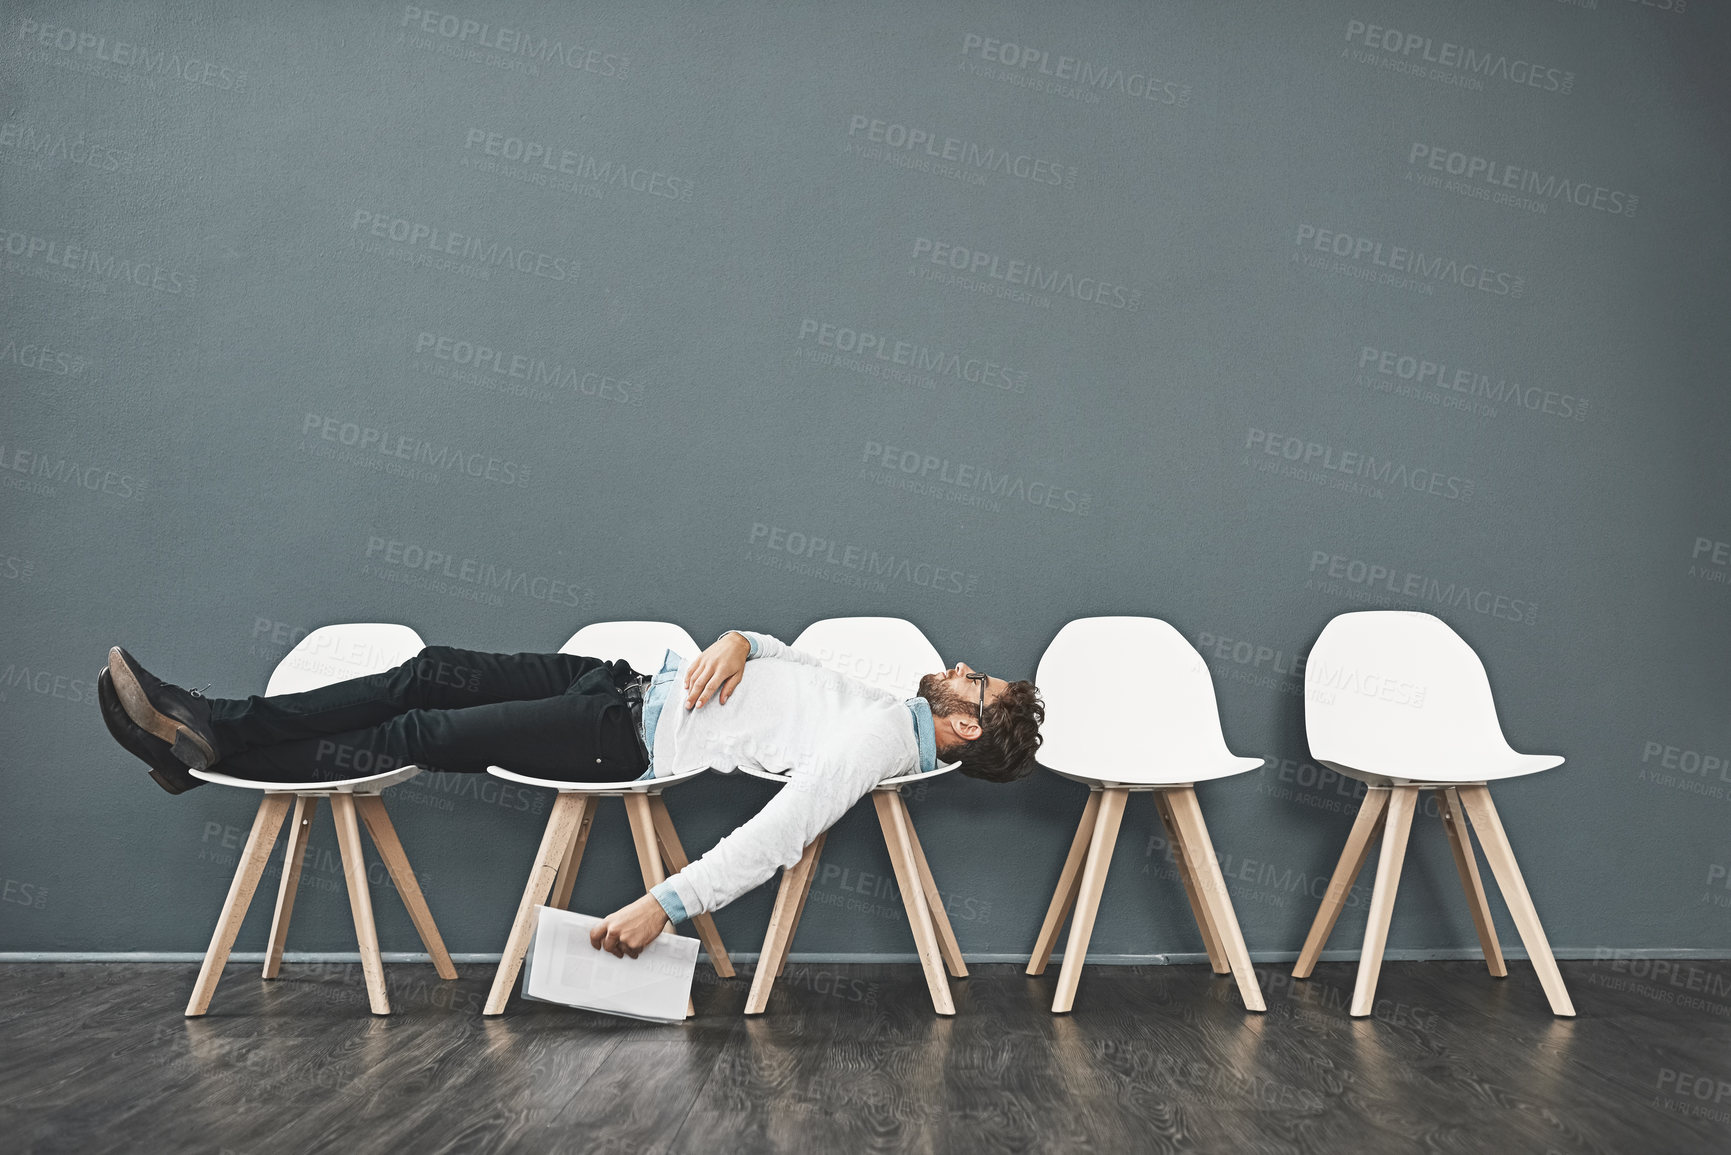 Buy stock photo Shot of a young man lying down on a row of chairs while waiting in line for a job interview